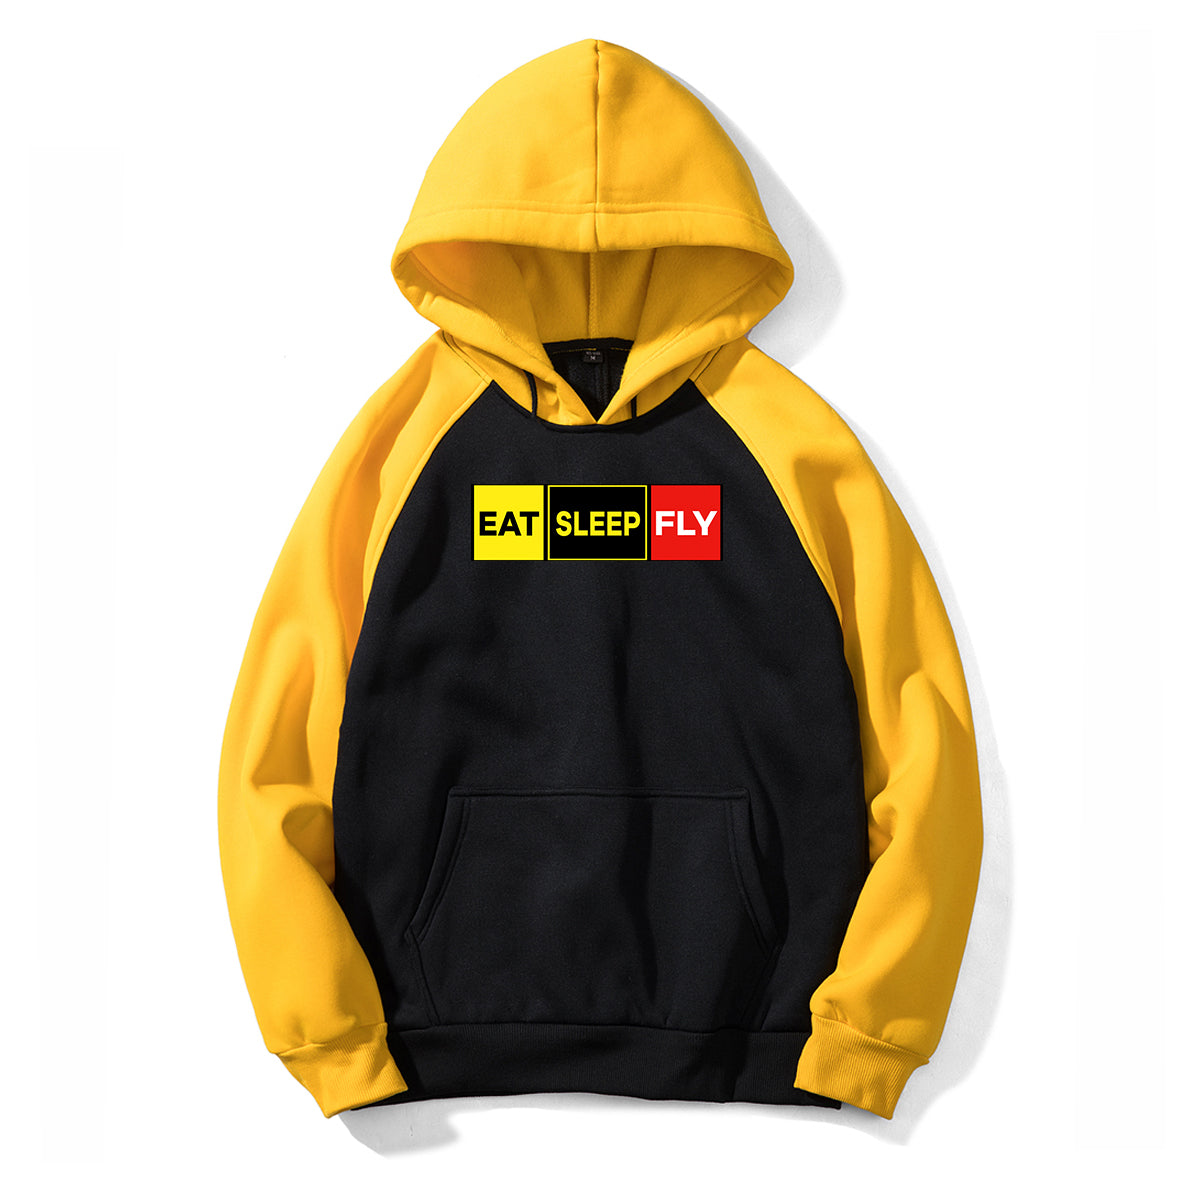 Eat Sleep Fly (Colourful) Designed Colourful Hoodies